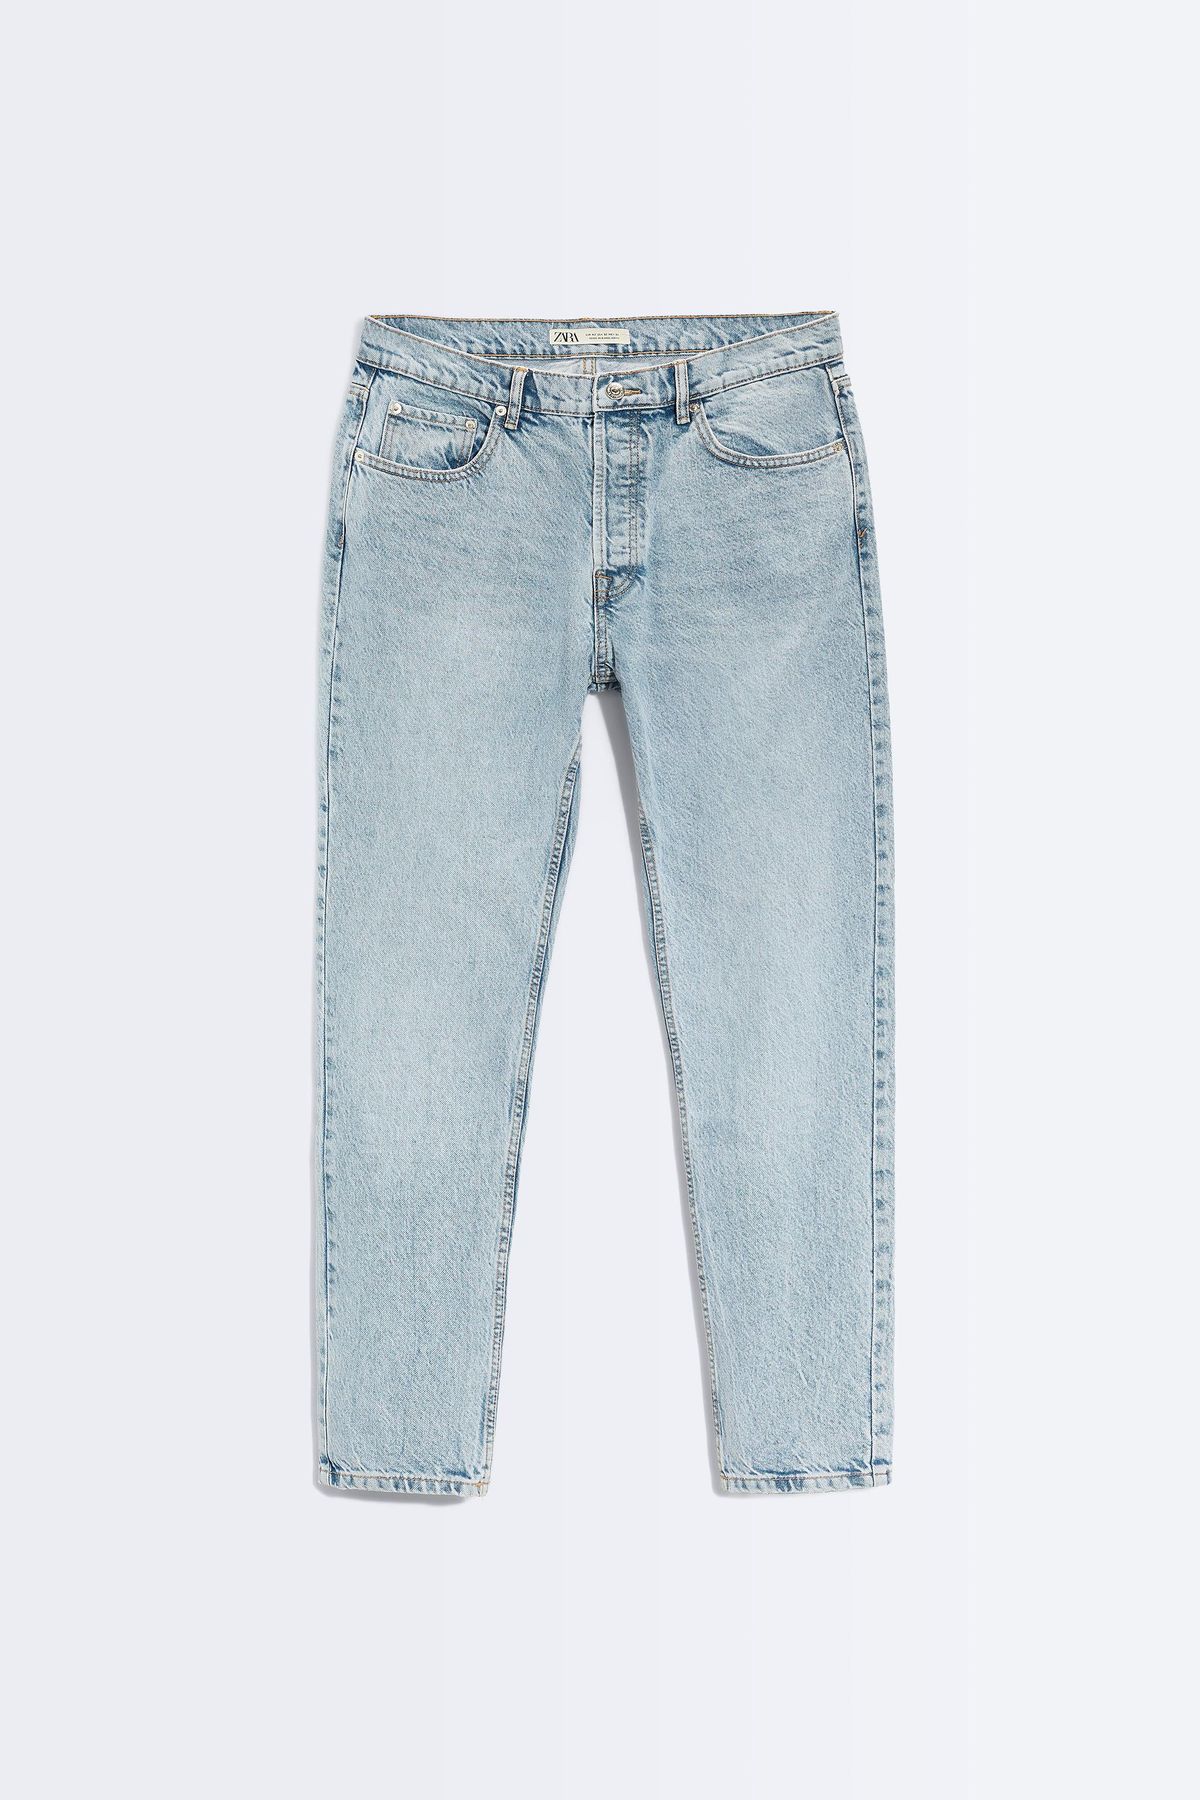 The ‘90s Slim Fit Jeans